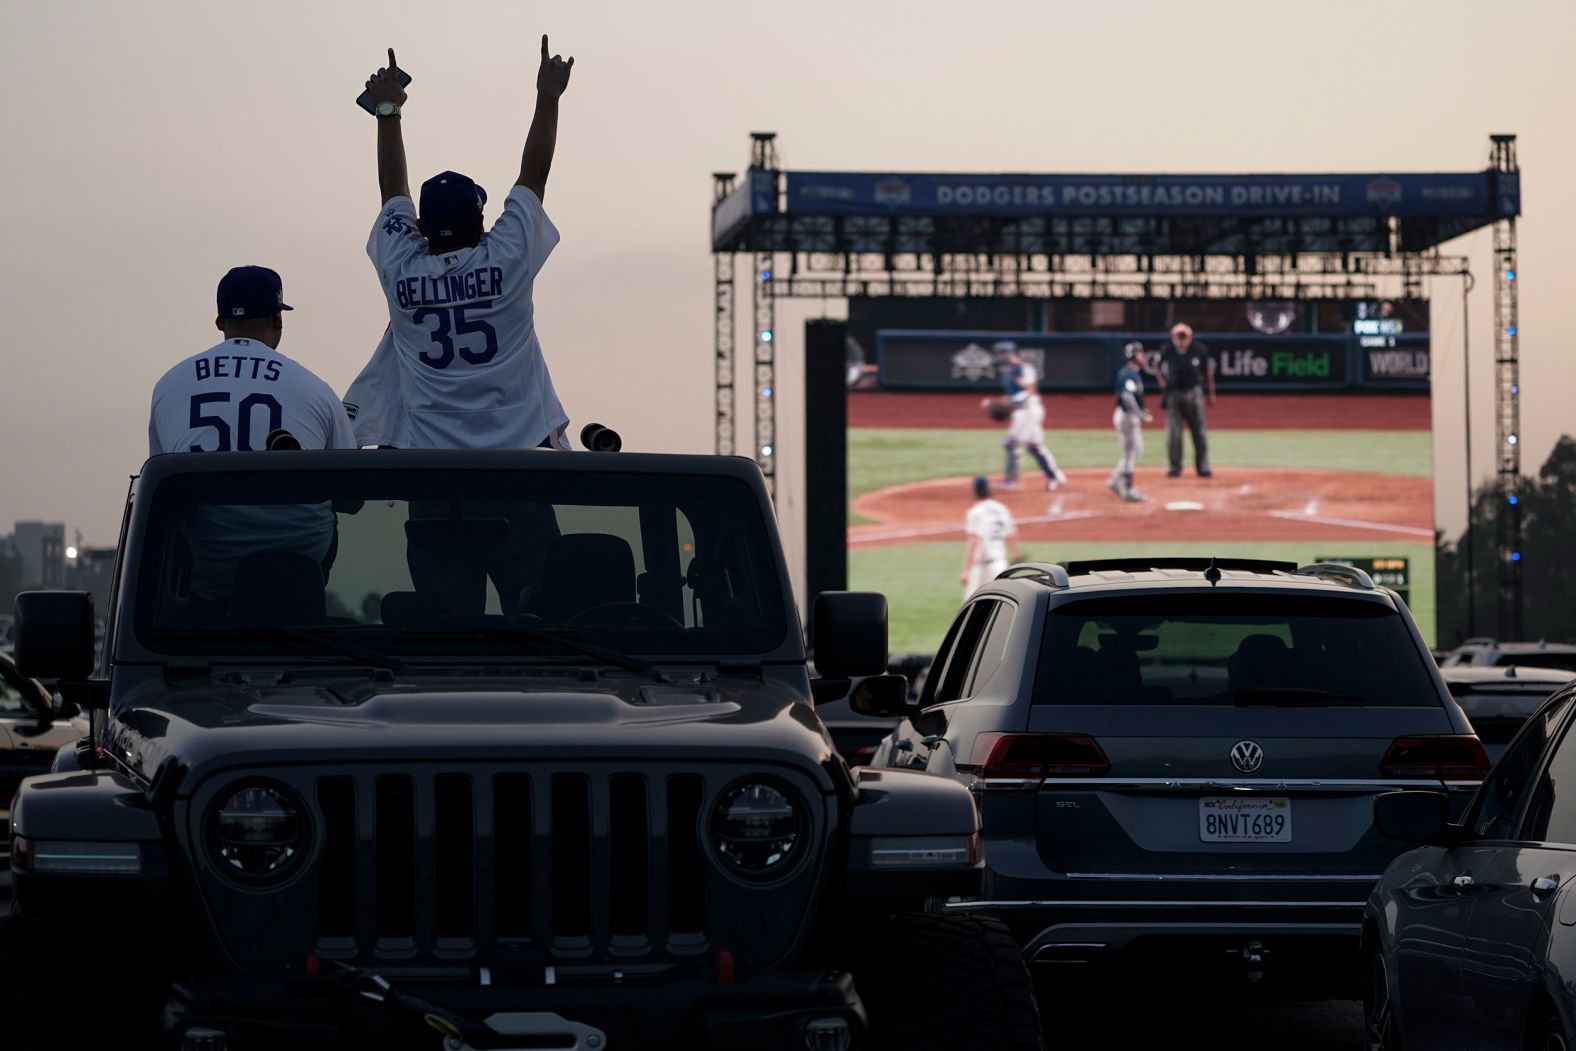 Mike Kim and Jacob Zelaya cheer from their car while watching the game outside Dodger Stadium in Los Angeles. Due to the coronavirus pandemic, Major League Baseball decided to play all World Series games at a neutral site in Arlington, Texas.